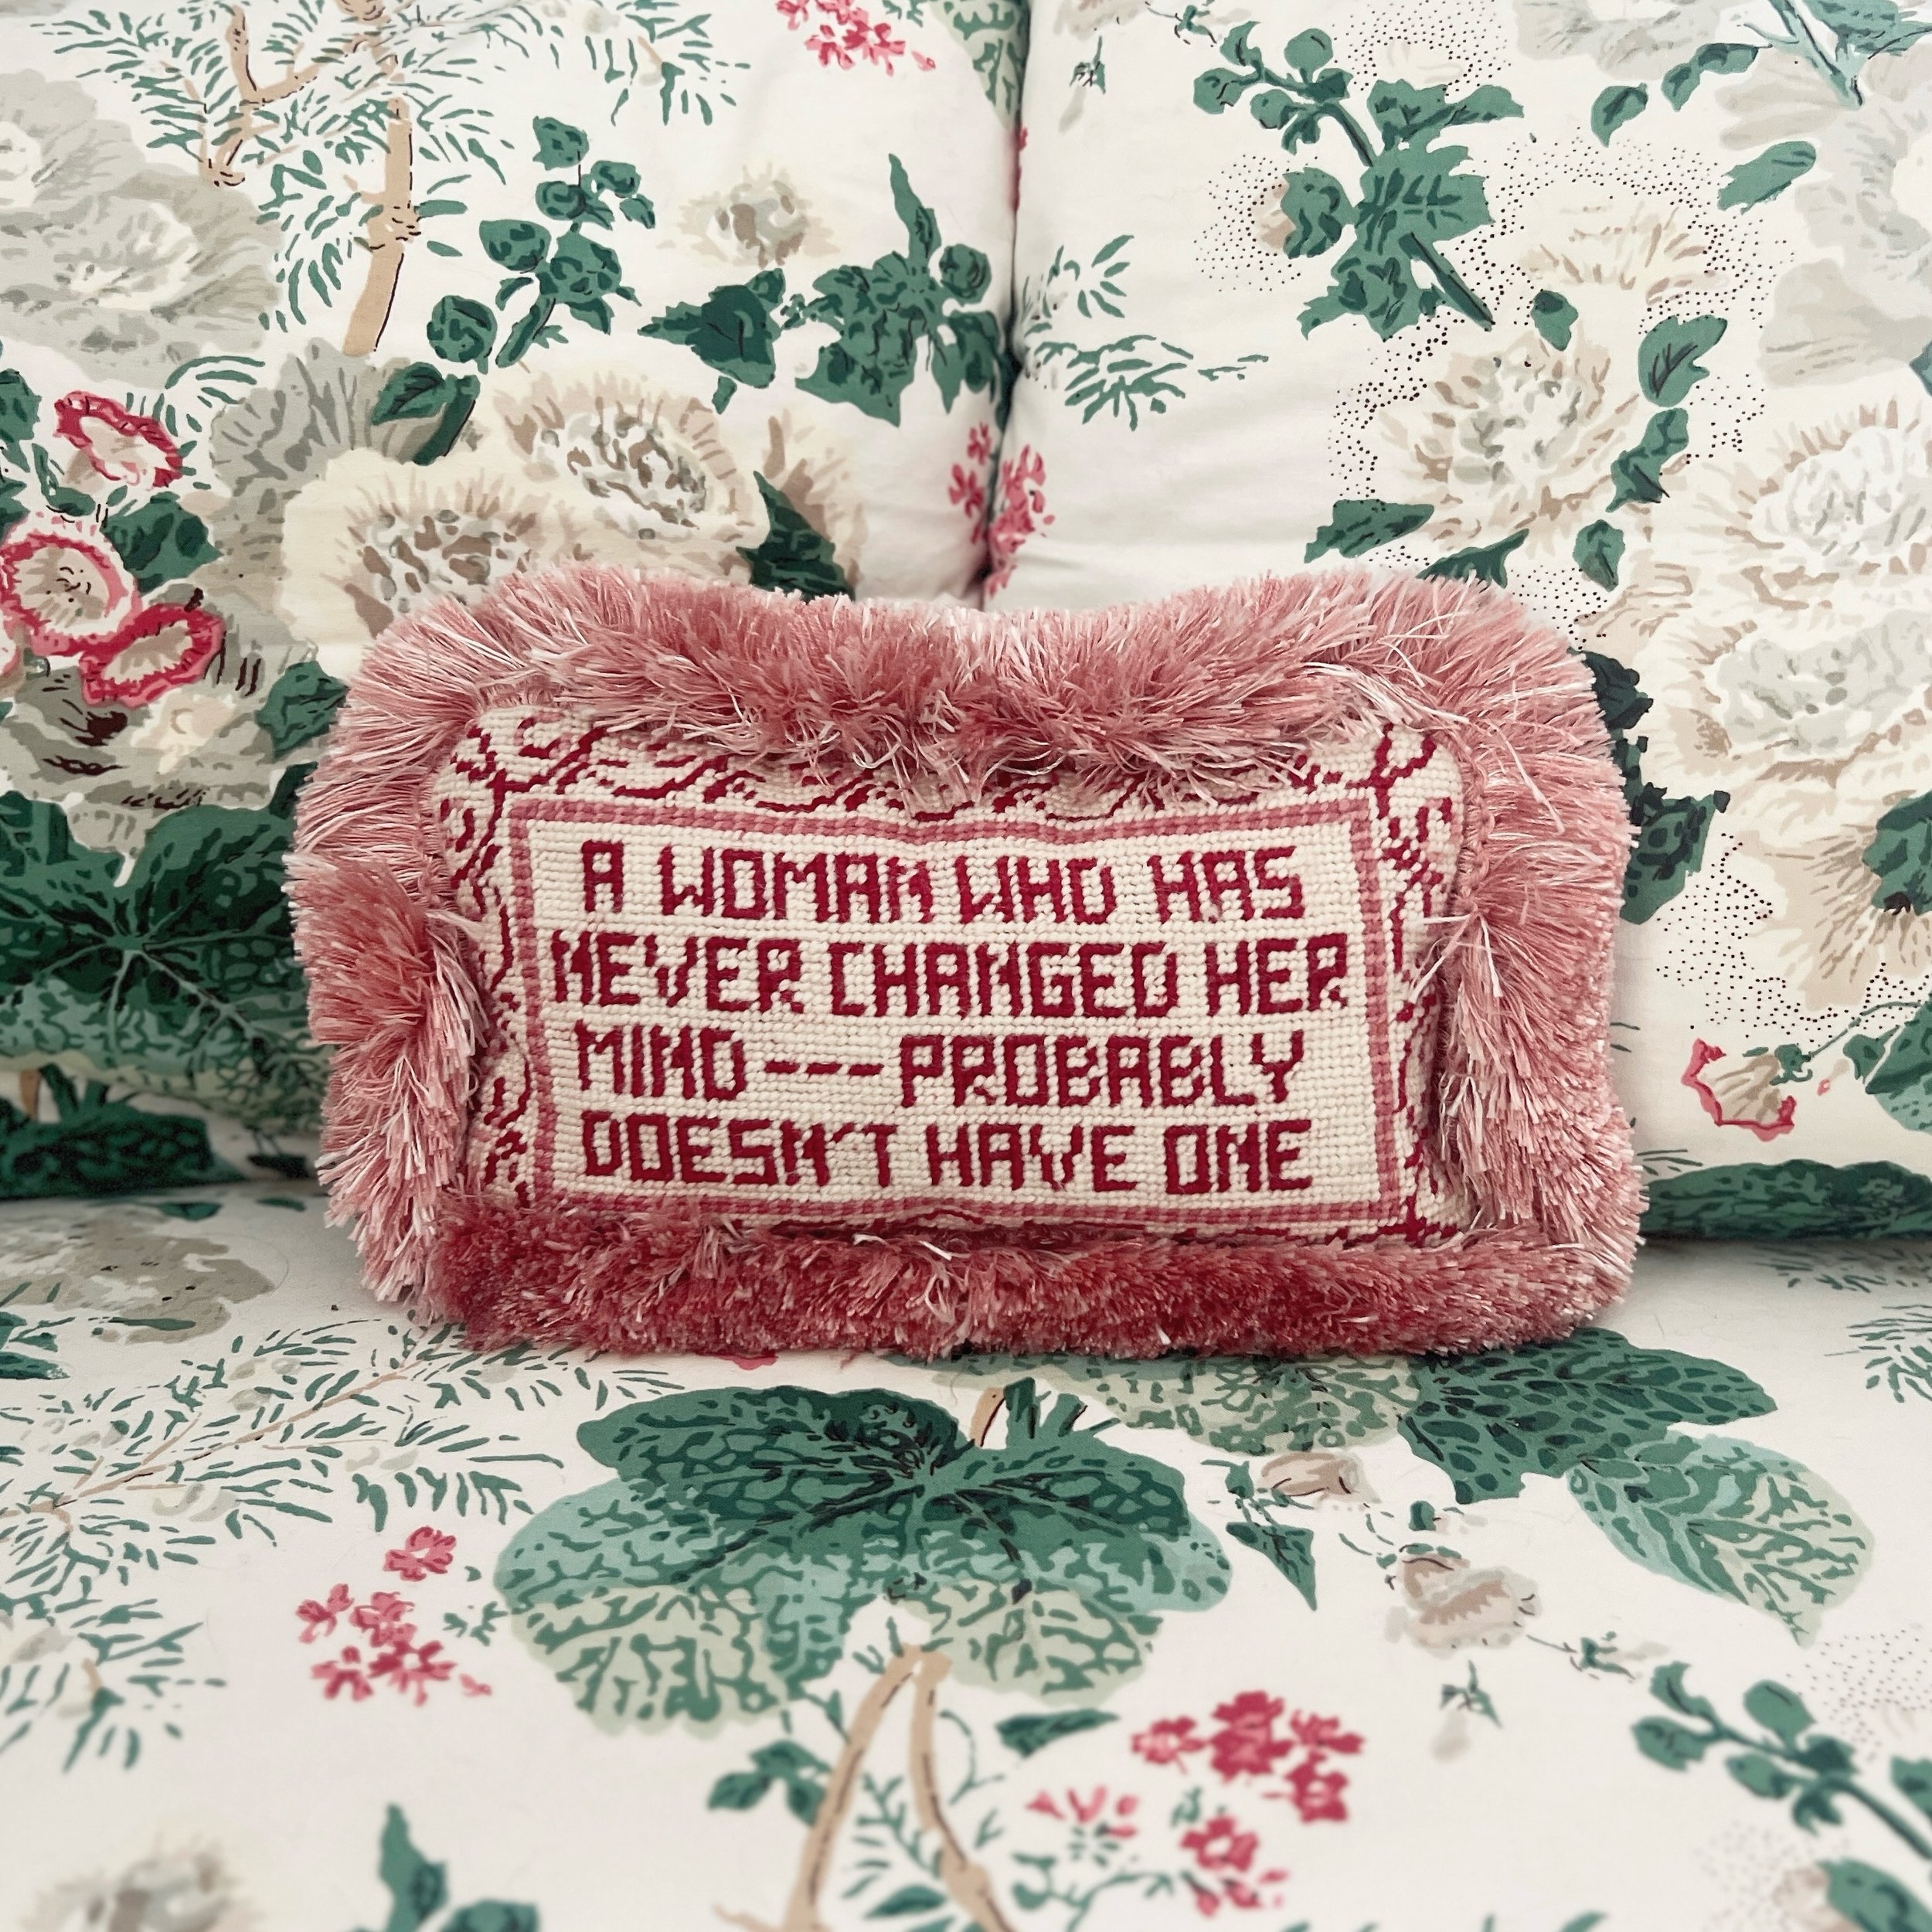 A needlepoint pillow worthy of prime real estate in your home 🩷 because sometimes others may need a not-so-subtle reminder! Now available on the website!